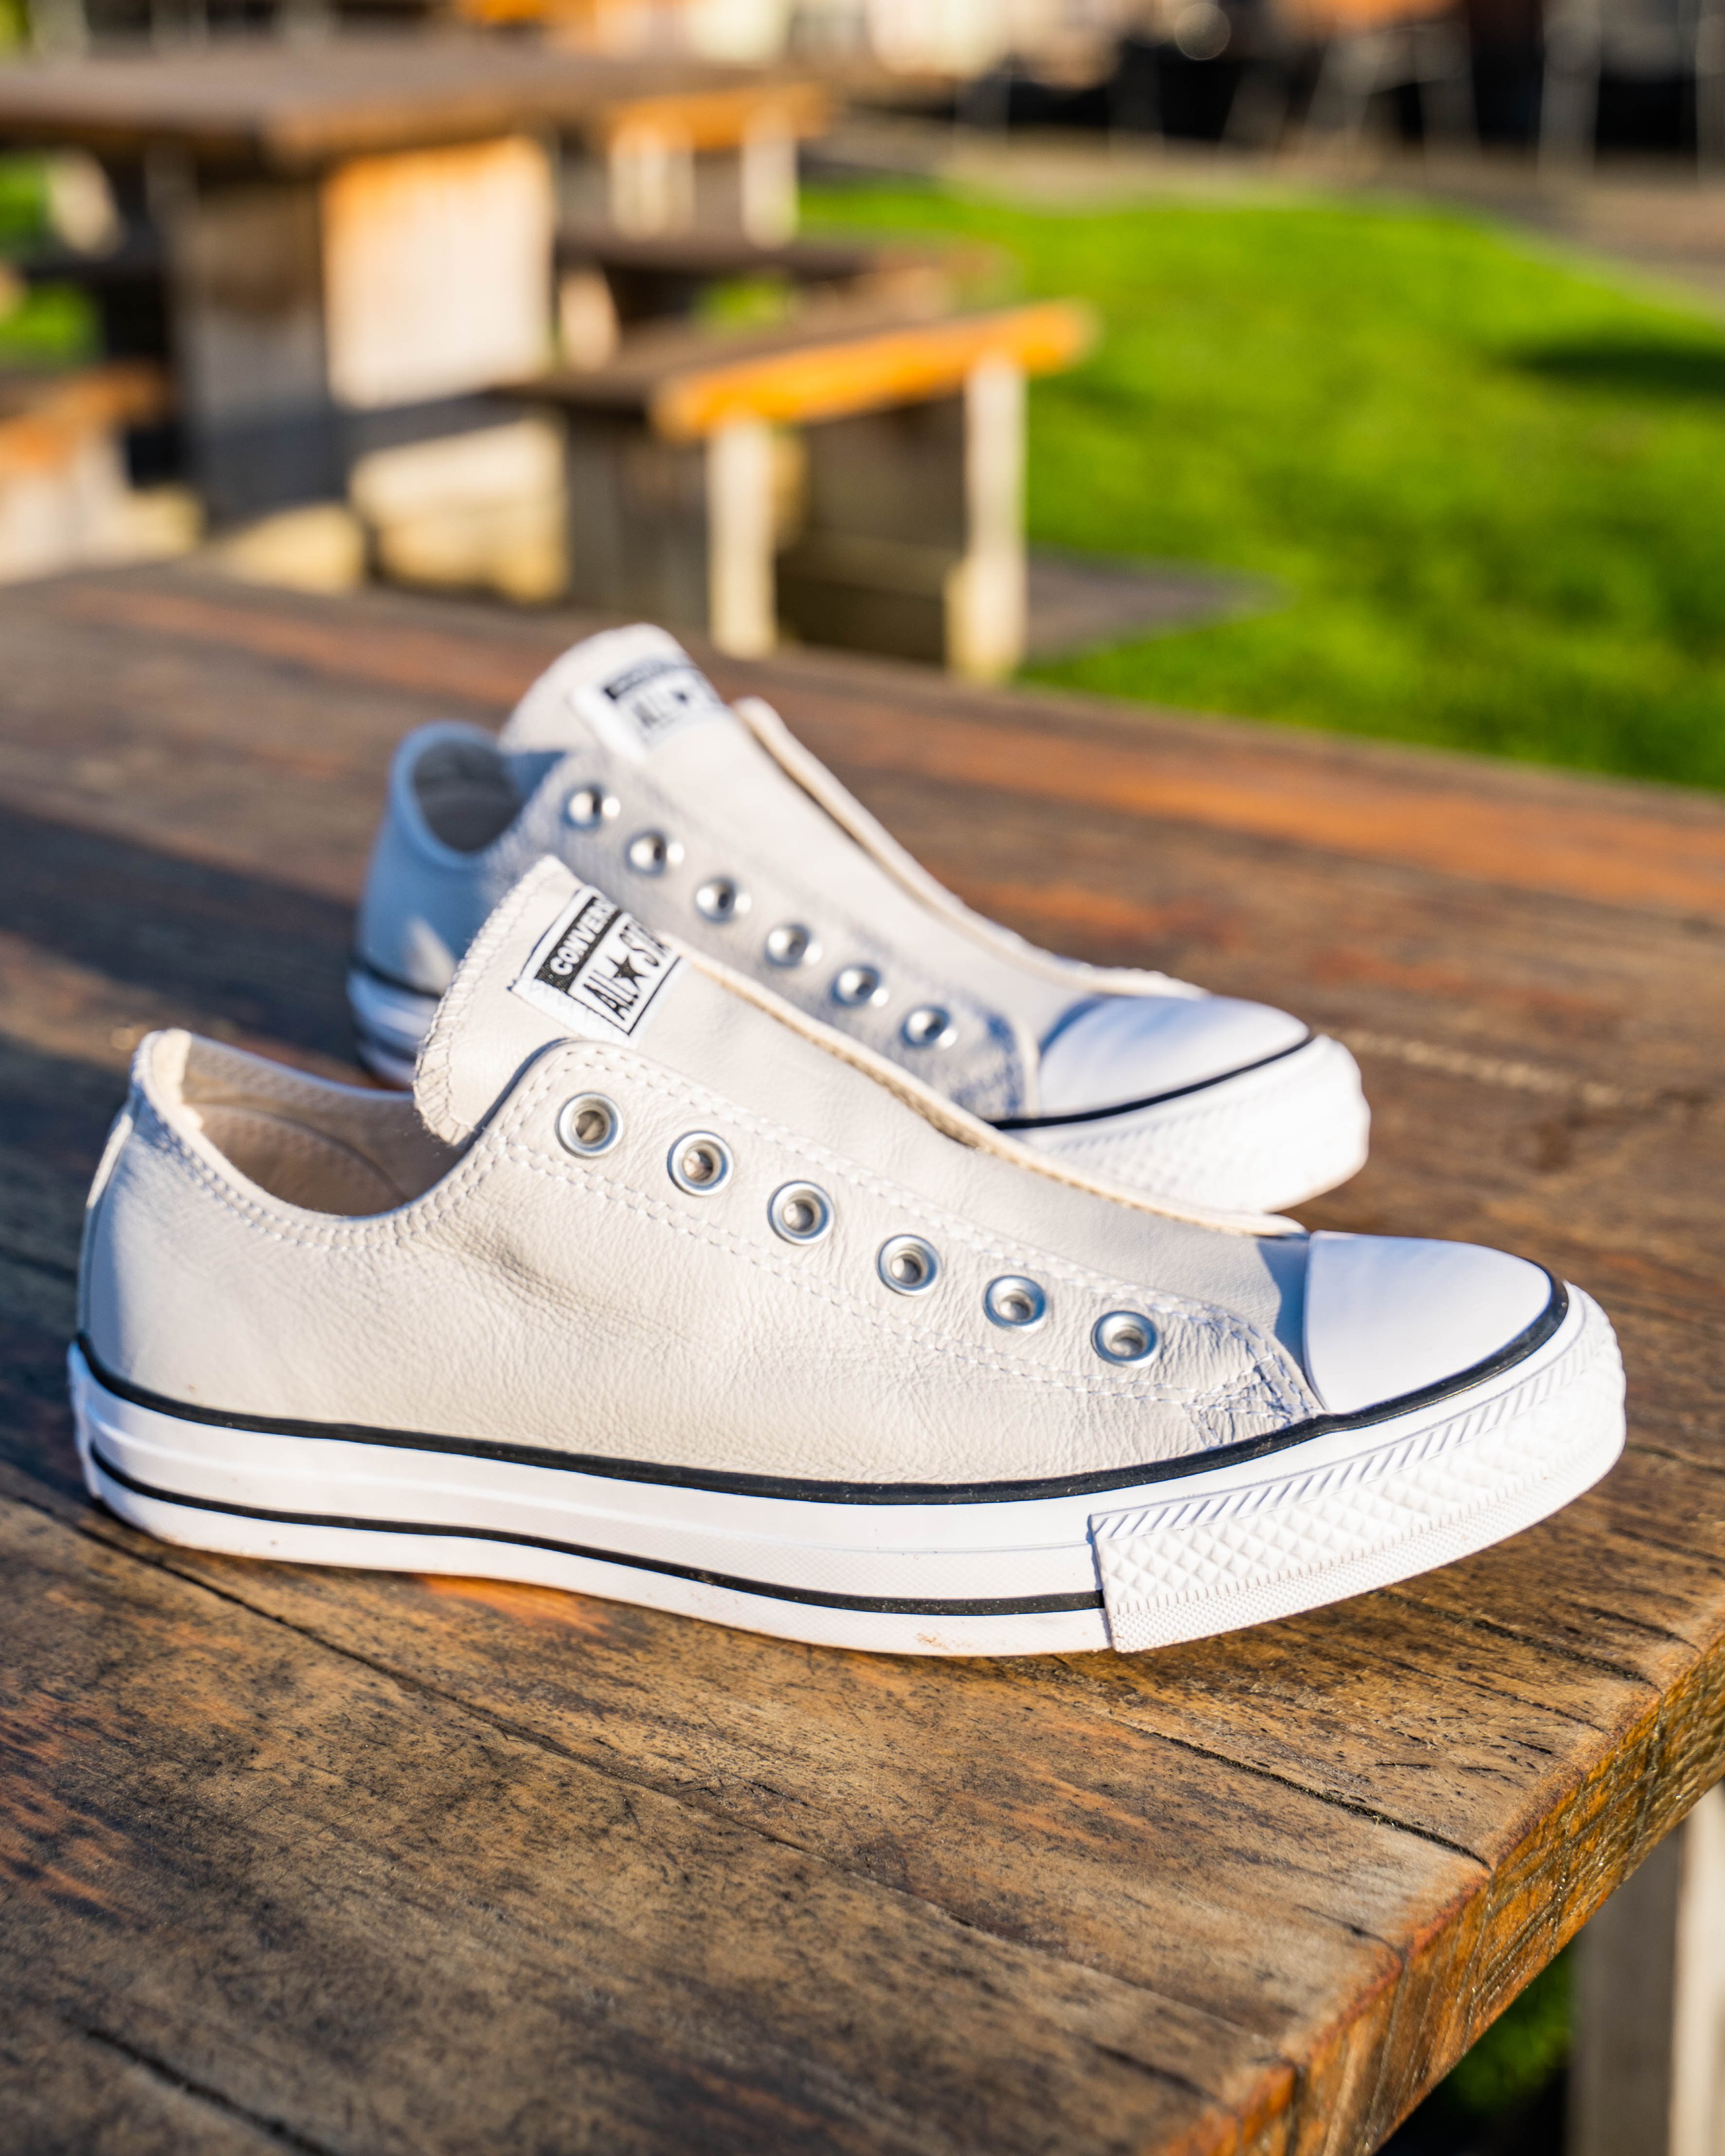 Baggins Shoes on Twitter: "The #Converse Leather Mouse Grey Slip-Ons bring a laidback, laceless look with right amount of edge. ⁠ ⁠ Shop here: https://t.co/PN89UTFWuV 〰️⁠ ⁠ https://t.co/fOVo8GBmk3" / Twitter